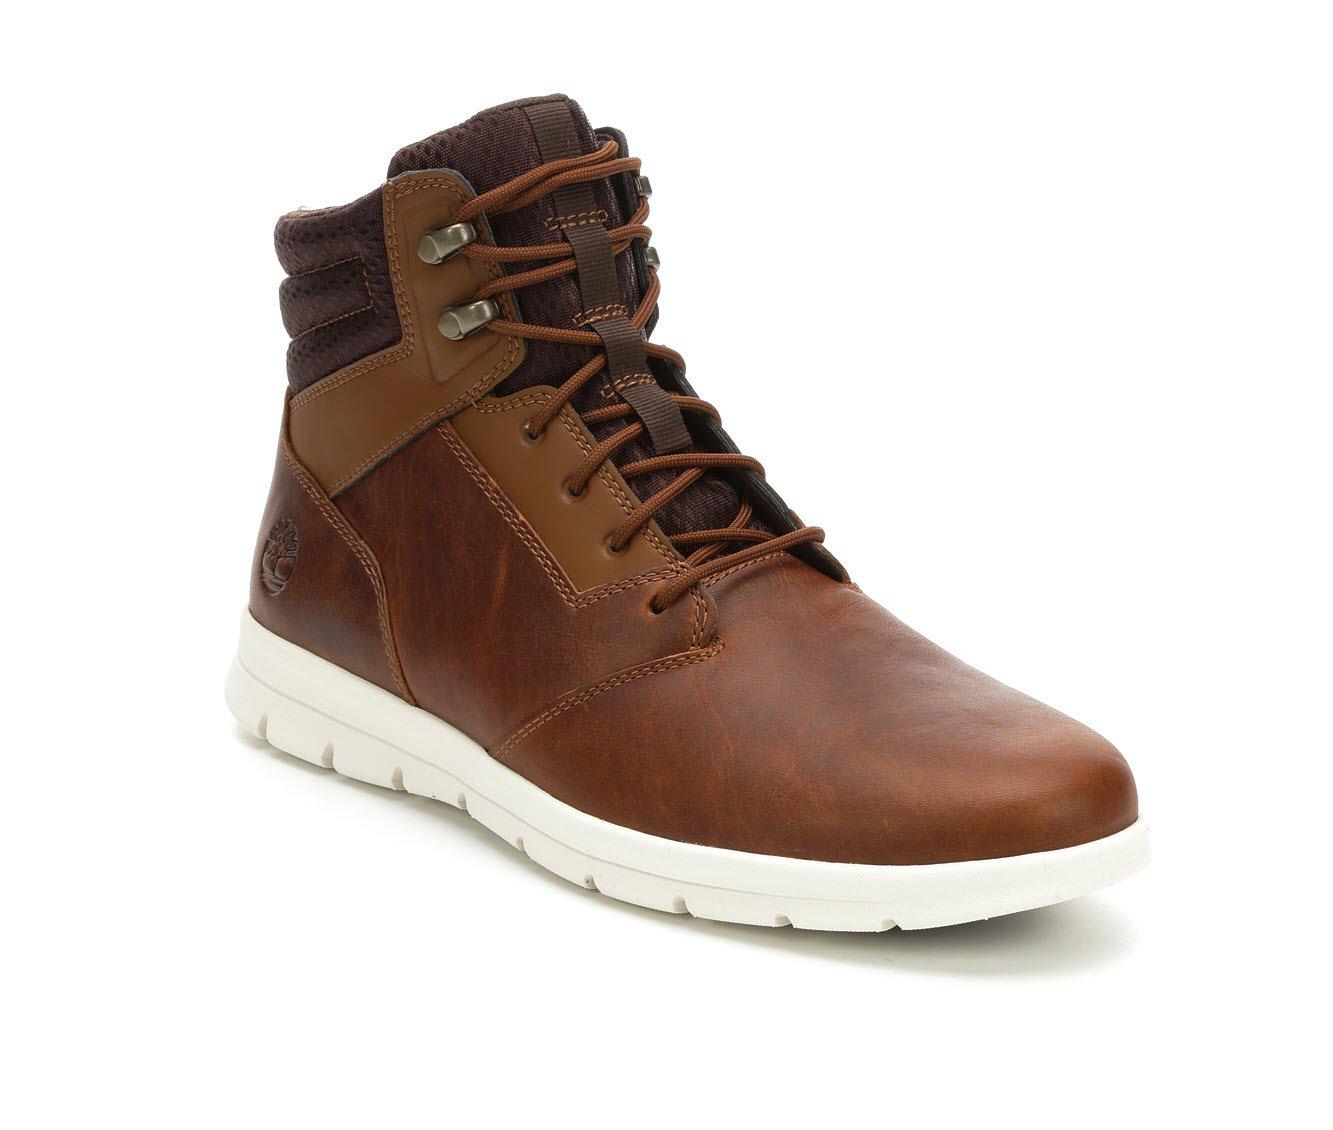 Timberland Graydon Men's Leather Sneaker Boots, Brown, 10